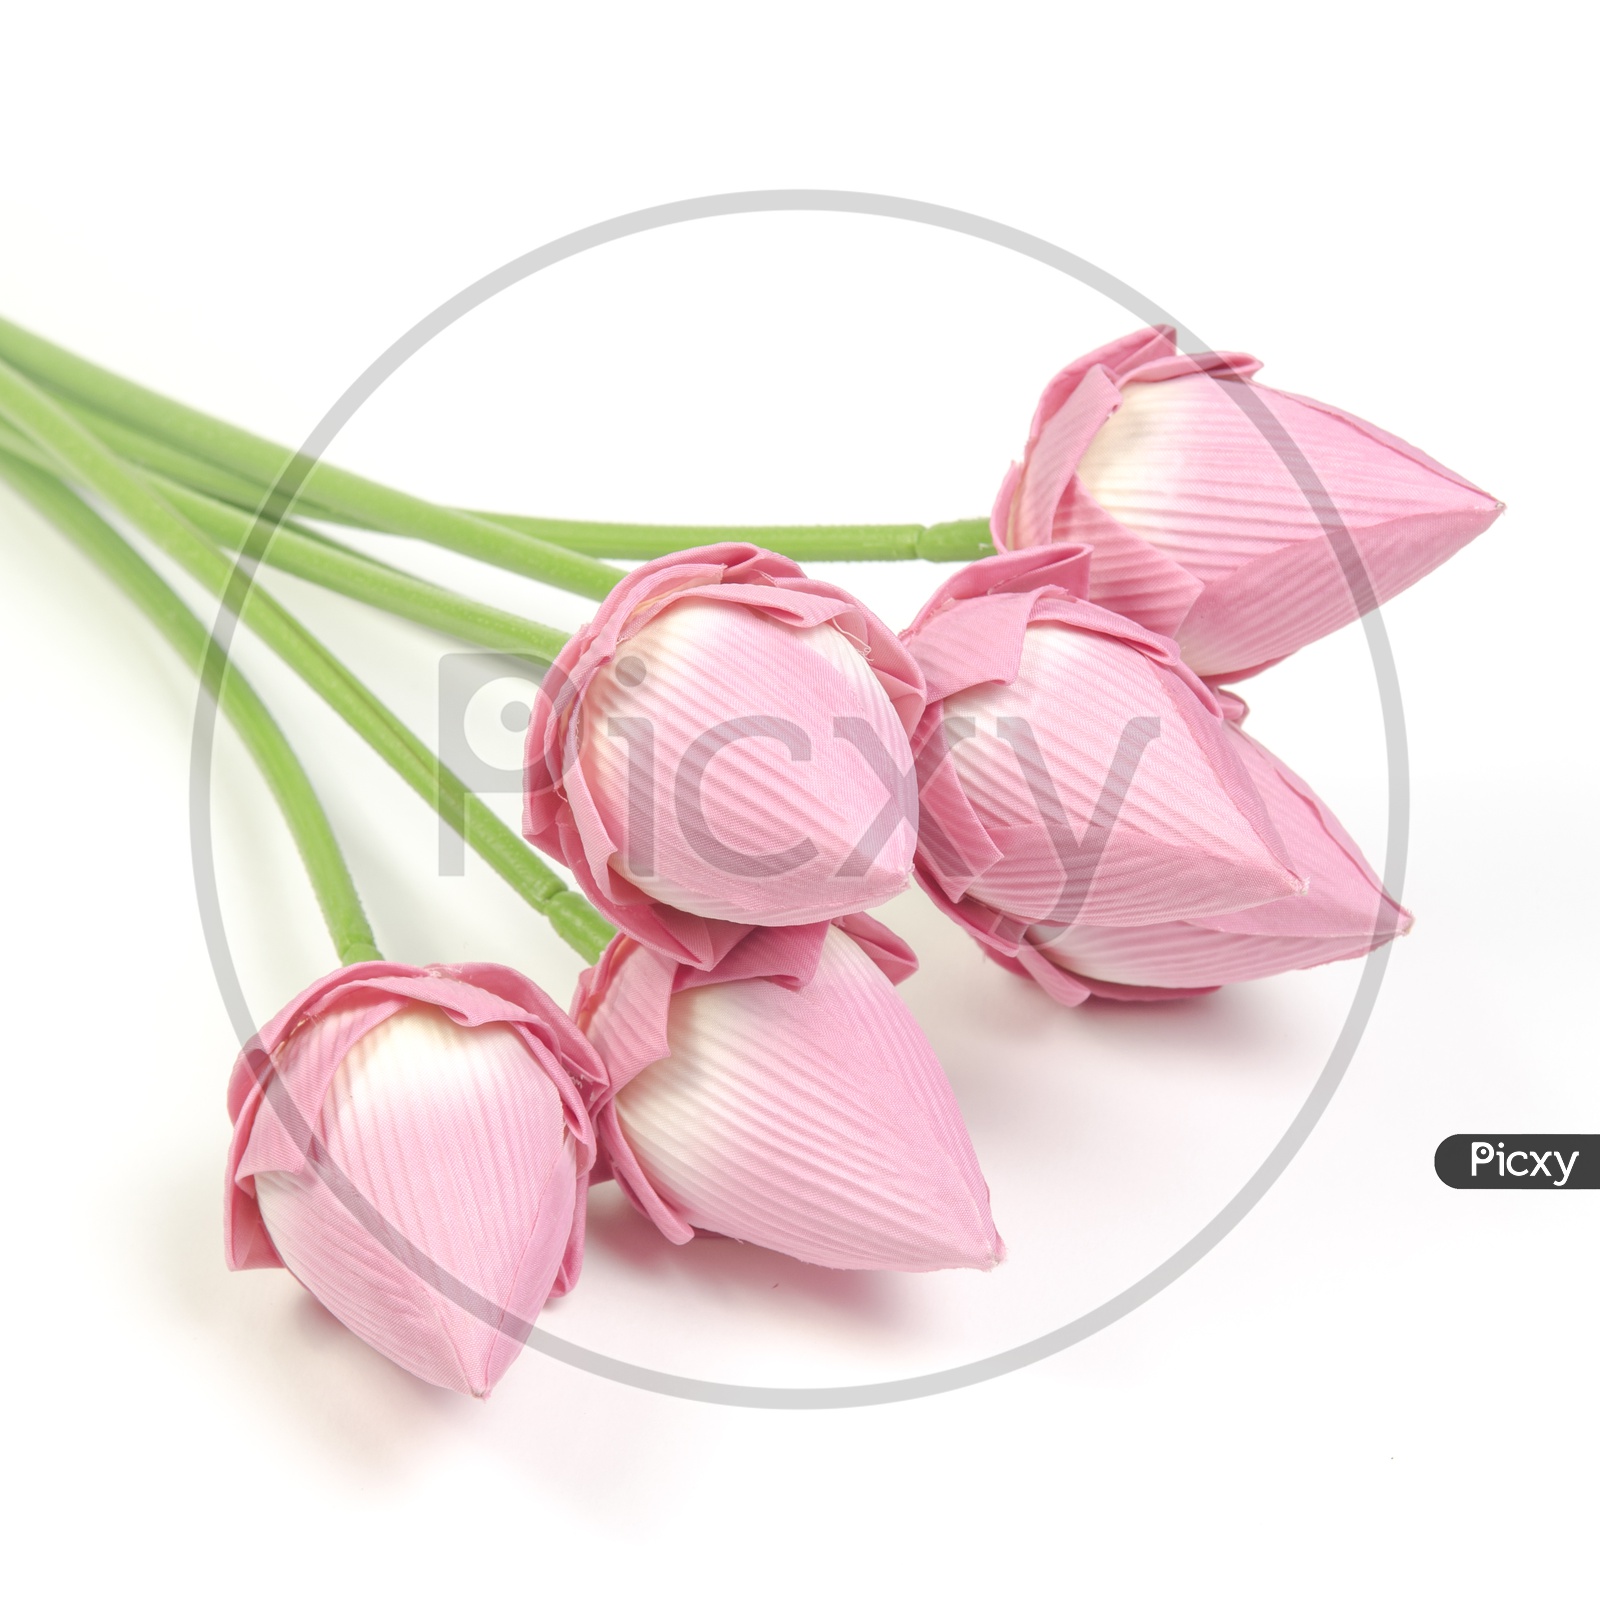 Lotus Flowers Bunch On an Isolated White Background